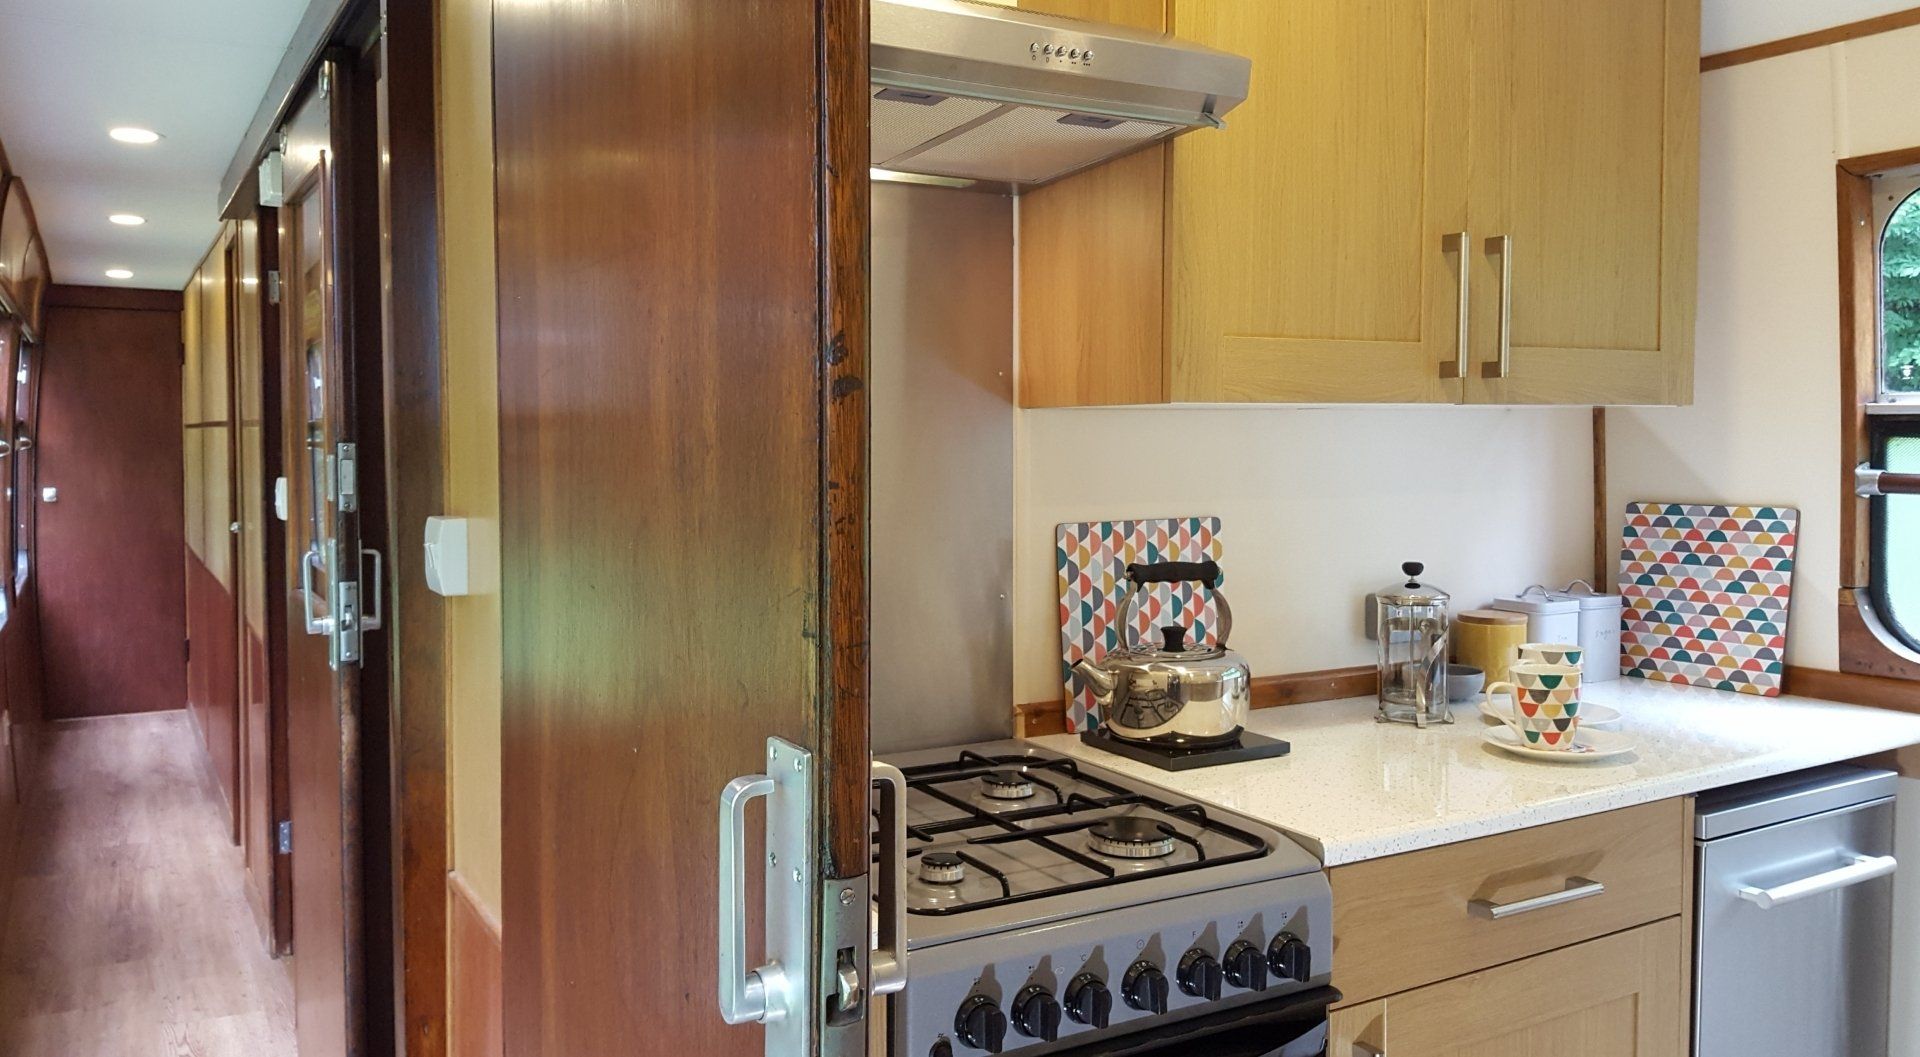 The modern fully-fitted kitchen in the railway carriage is its original space where railway engineers were once tended by a chef in full whites